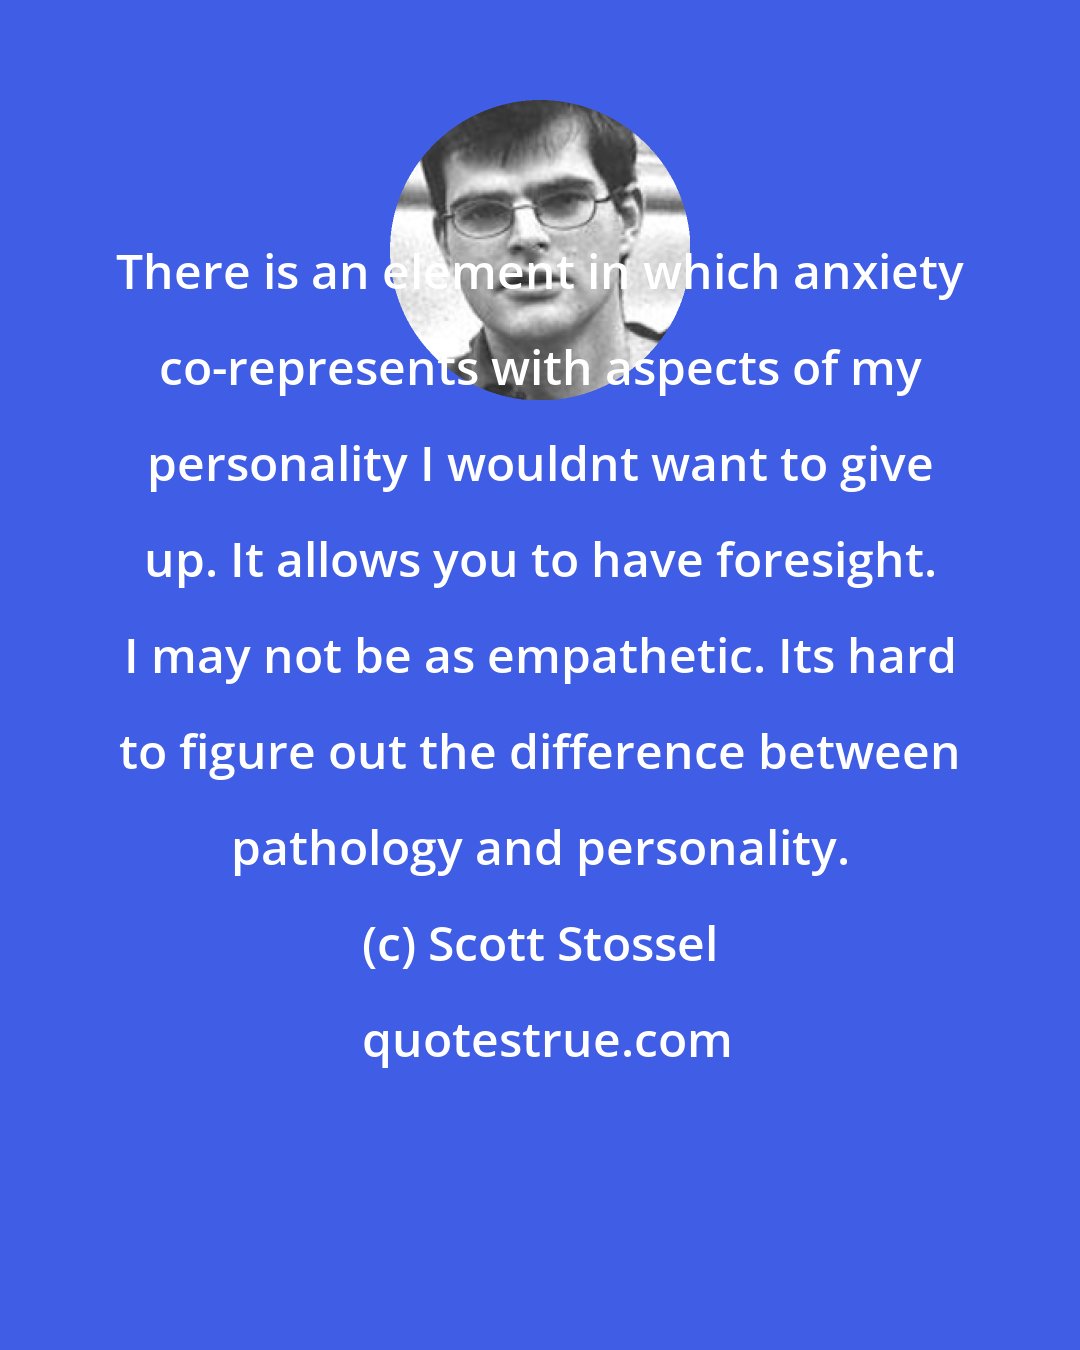 Scott Stossel: There is an element in which anxiety co-represents with aspects of my personality I wouldnt want to give up. It allows you to have foresight. I may not be as empathetic. Its hard to figure out the difference between pathology and personality.